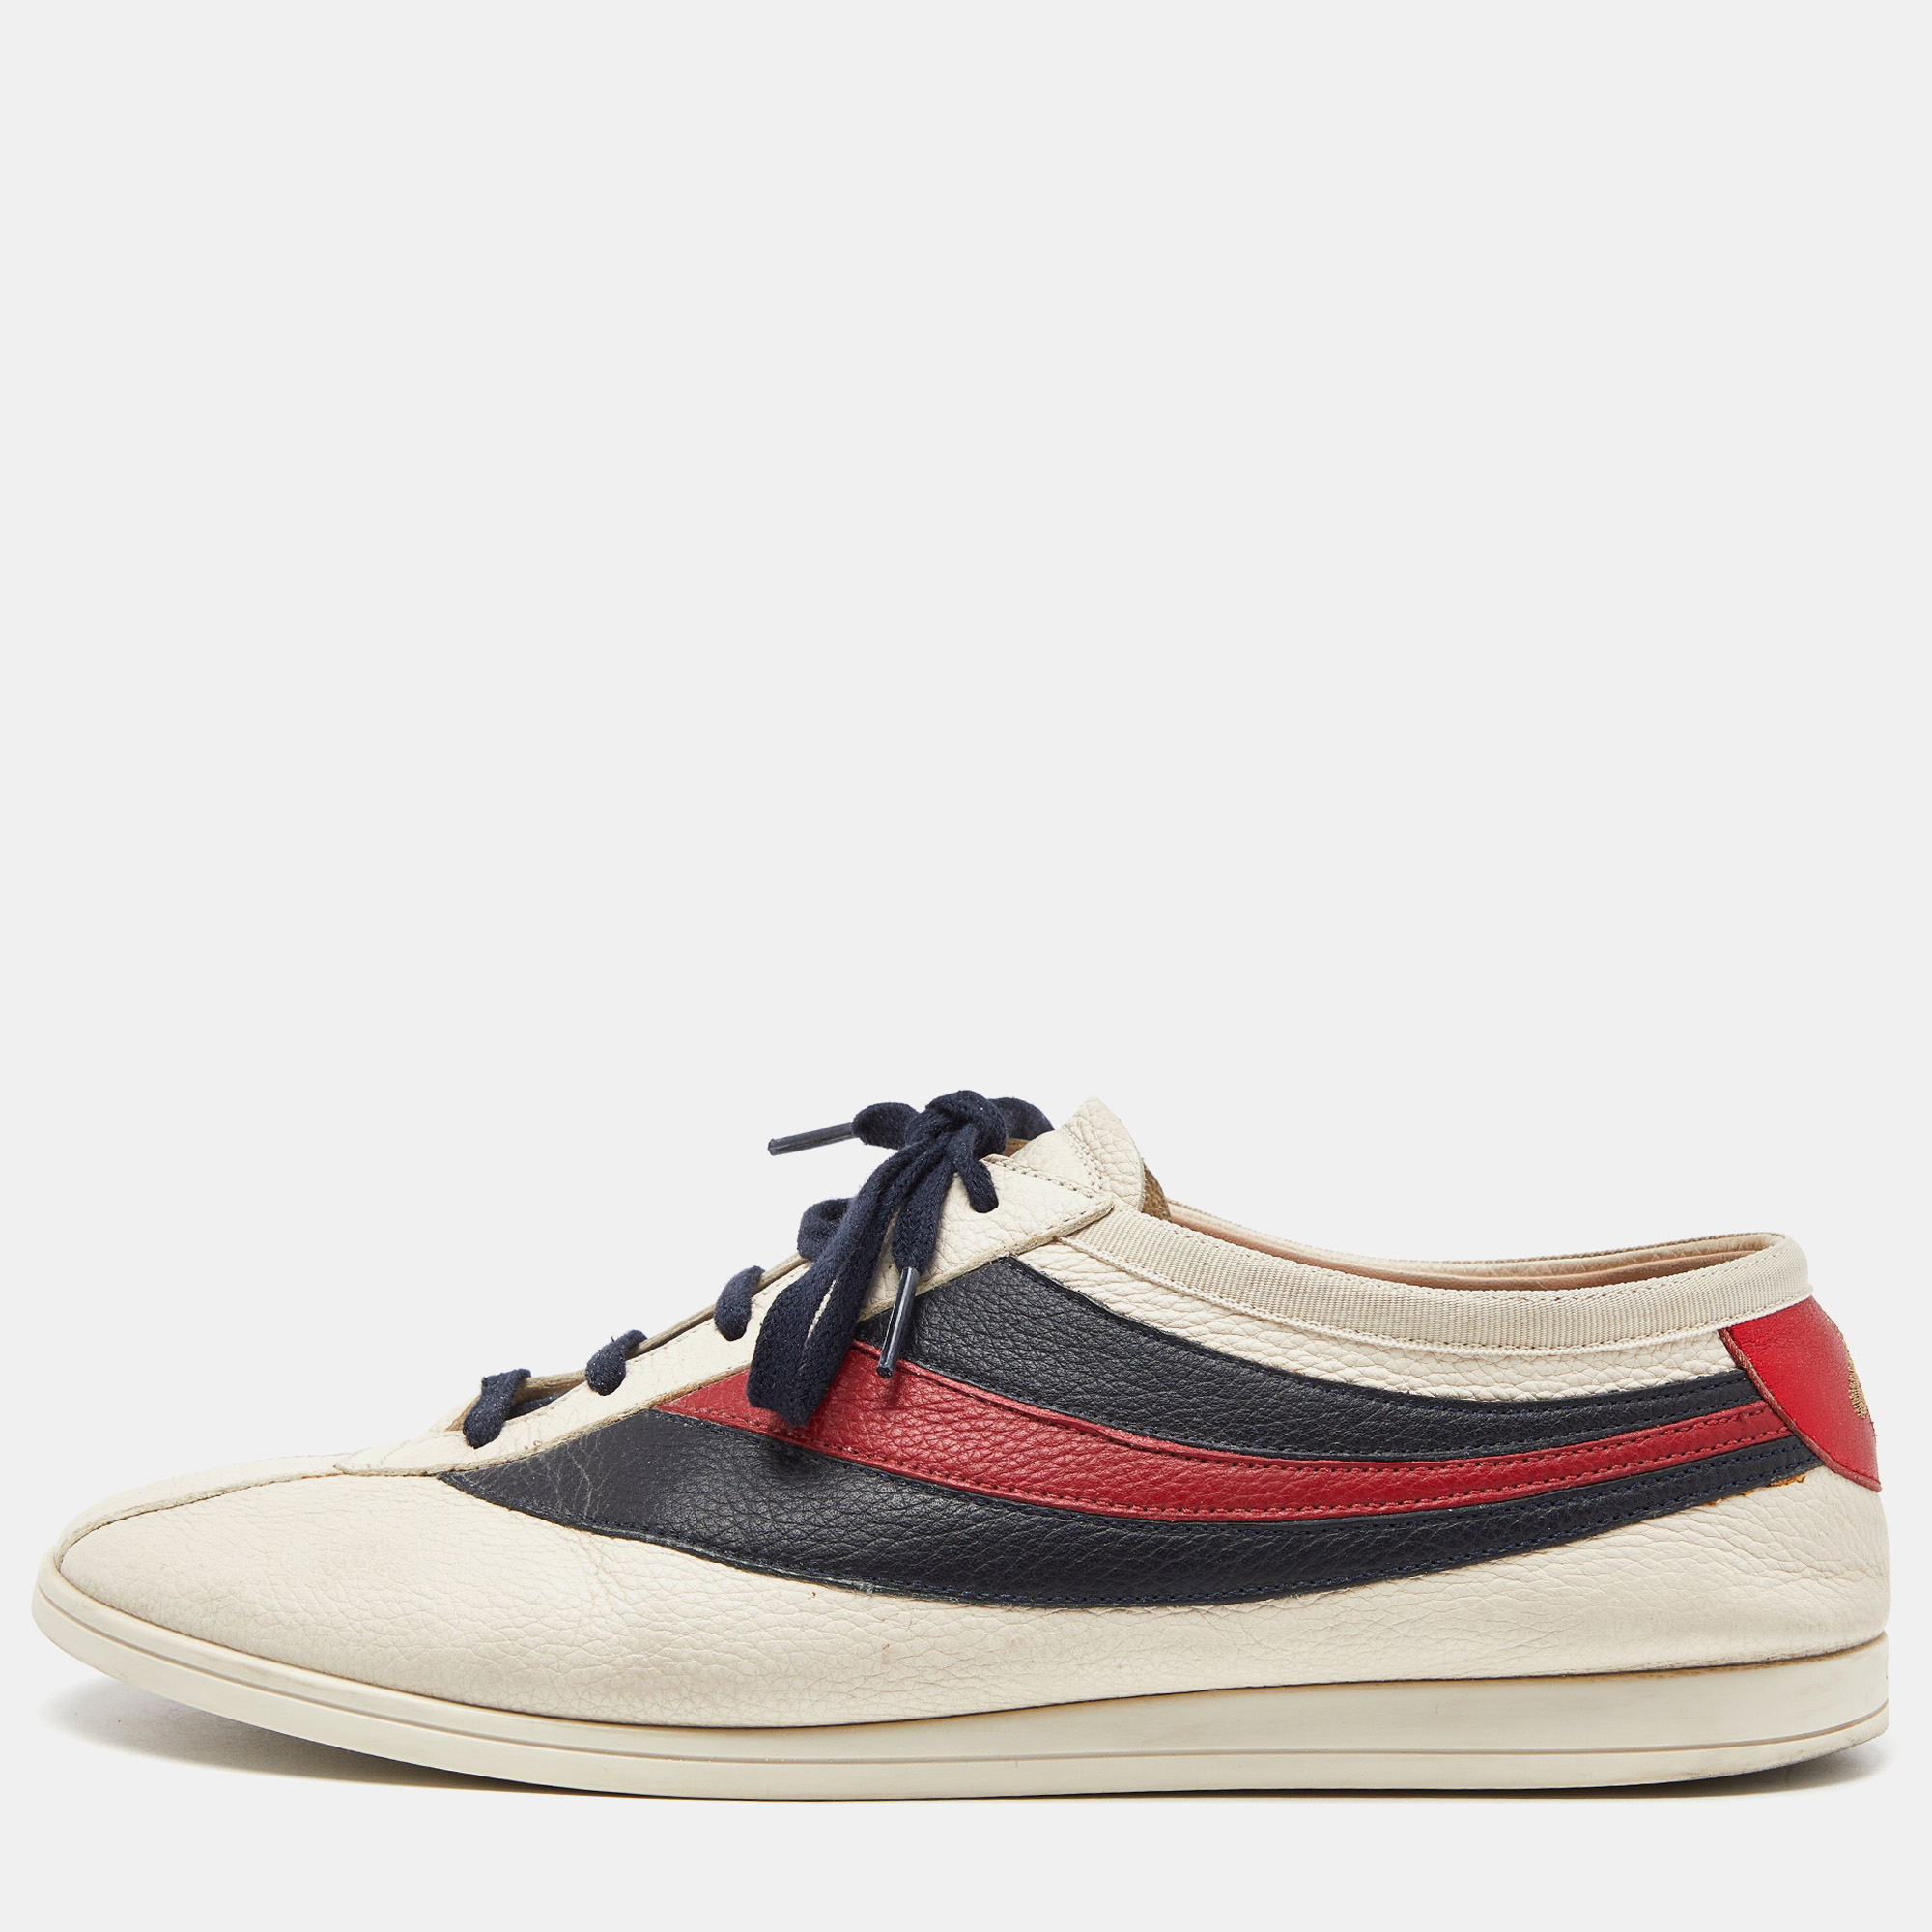 Stacked with signature details this Gucci pair is rendered in leather and is designed in a low top style with lace up vamps. They have been fashioned with the iconic Web stripes. Complete with logo accented counters these shoes can be easily coordinated with your casuals.